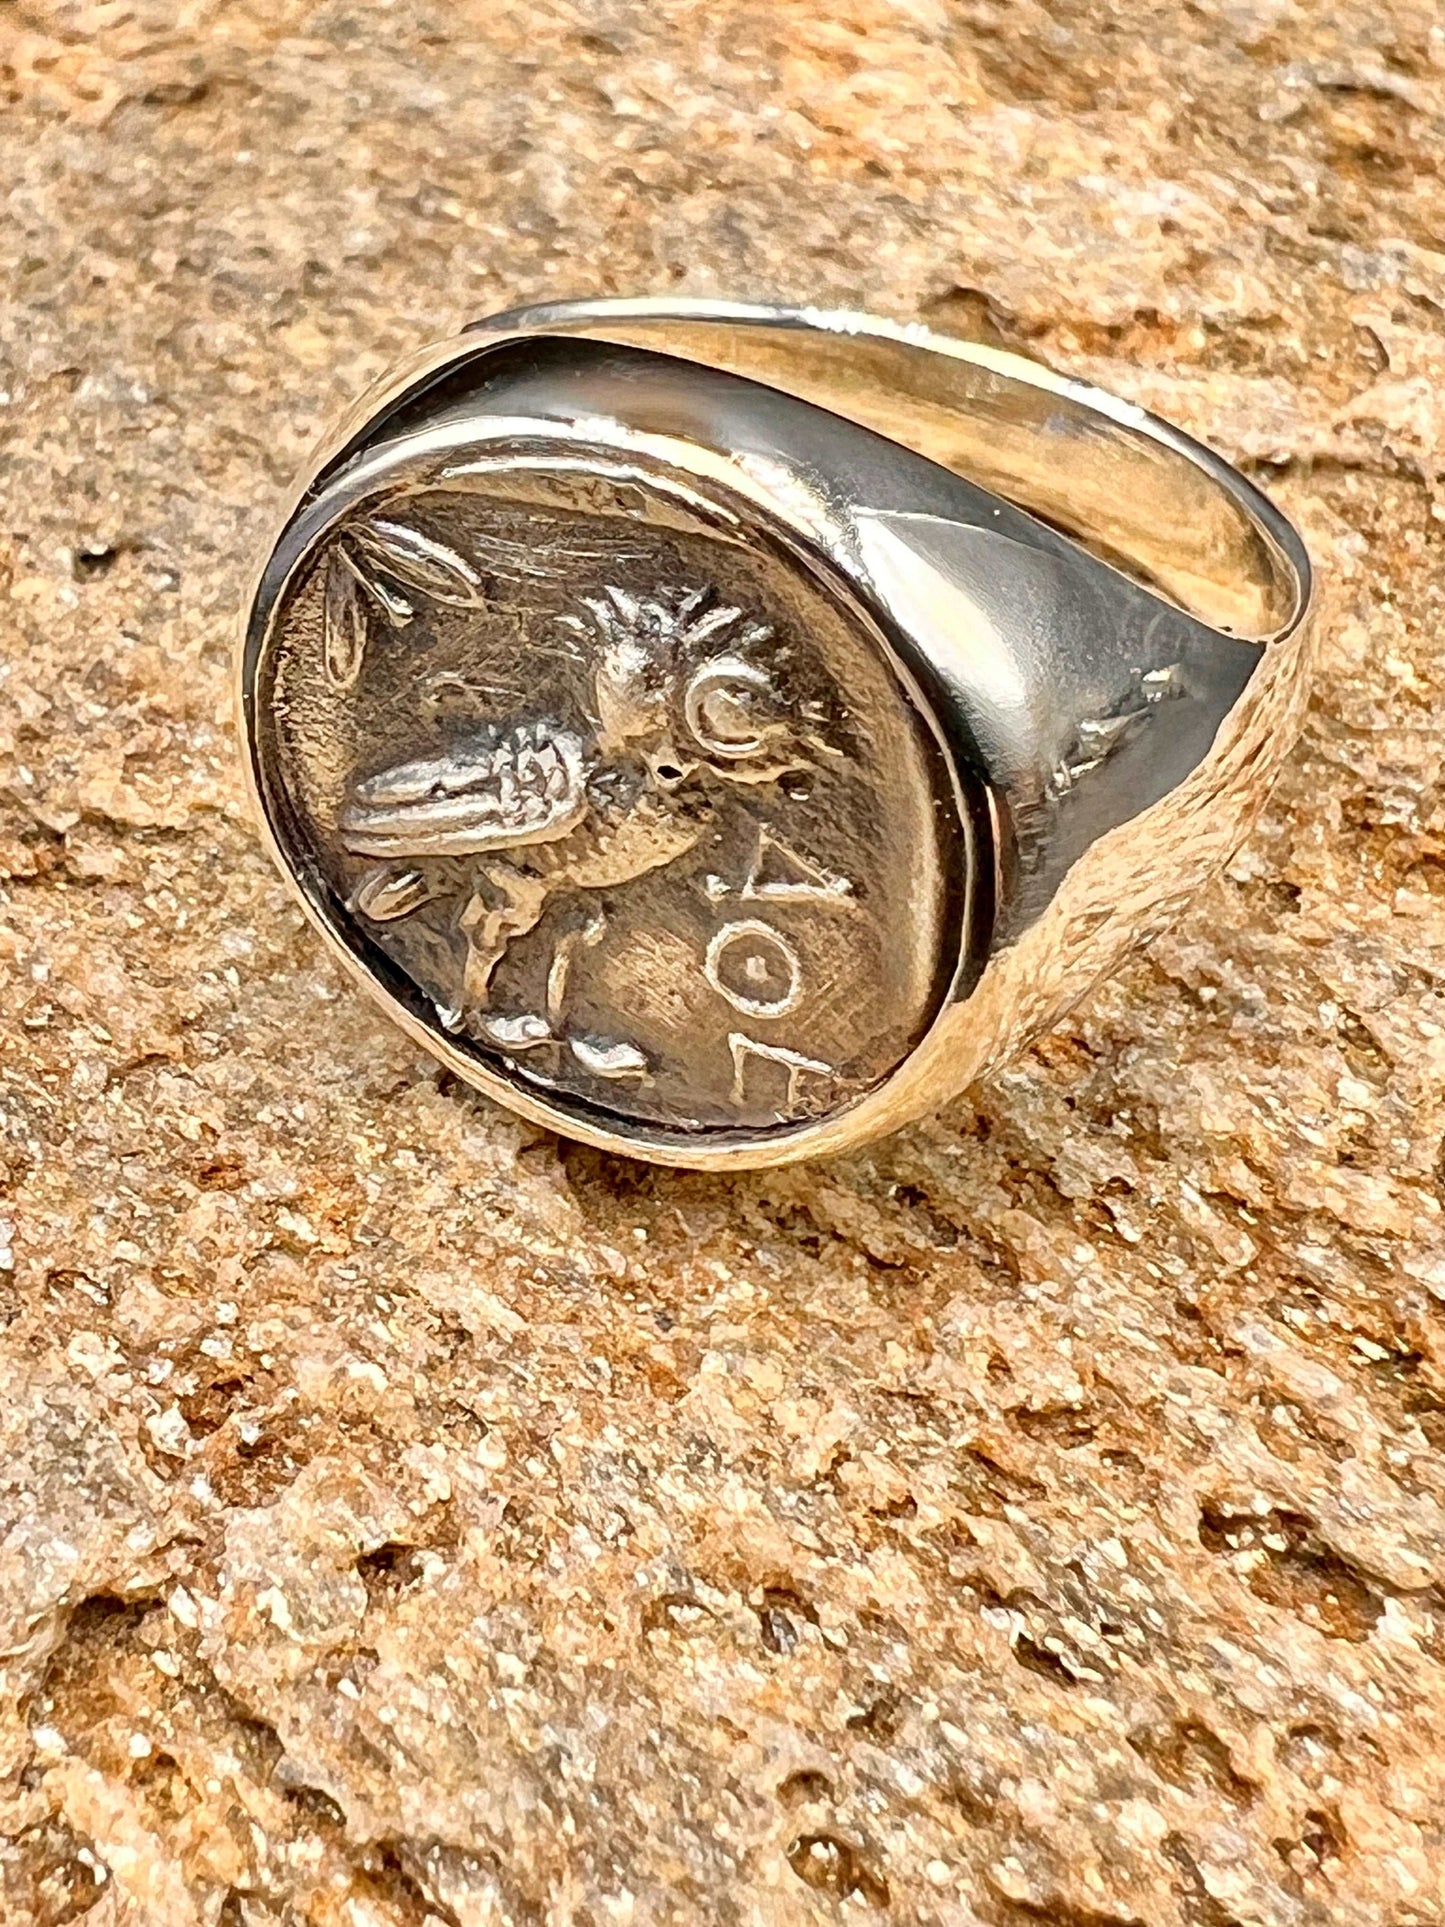 Athena owl Signet ring ancient Greek coin copy  925 Silver